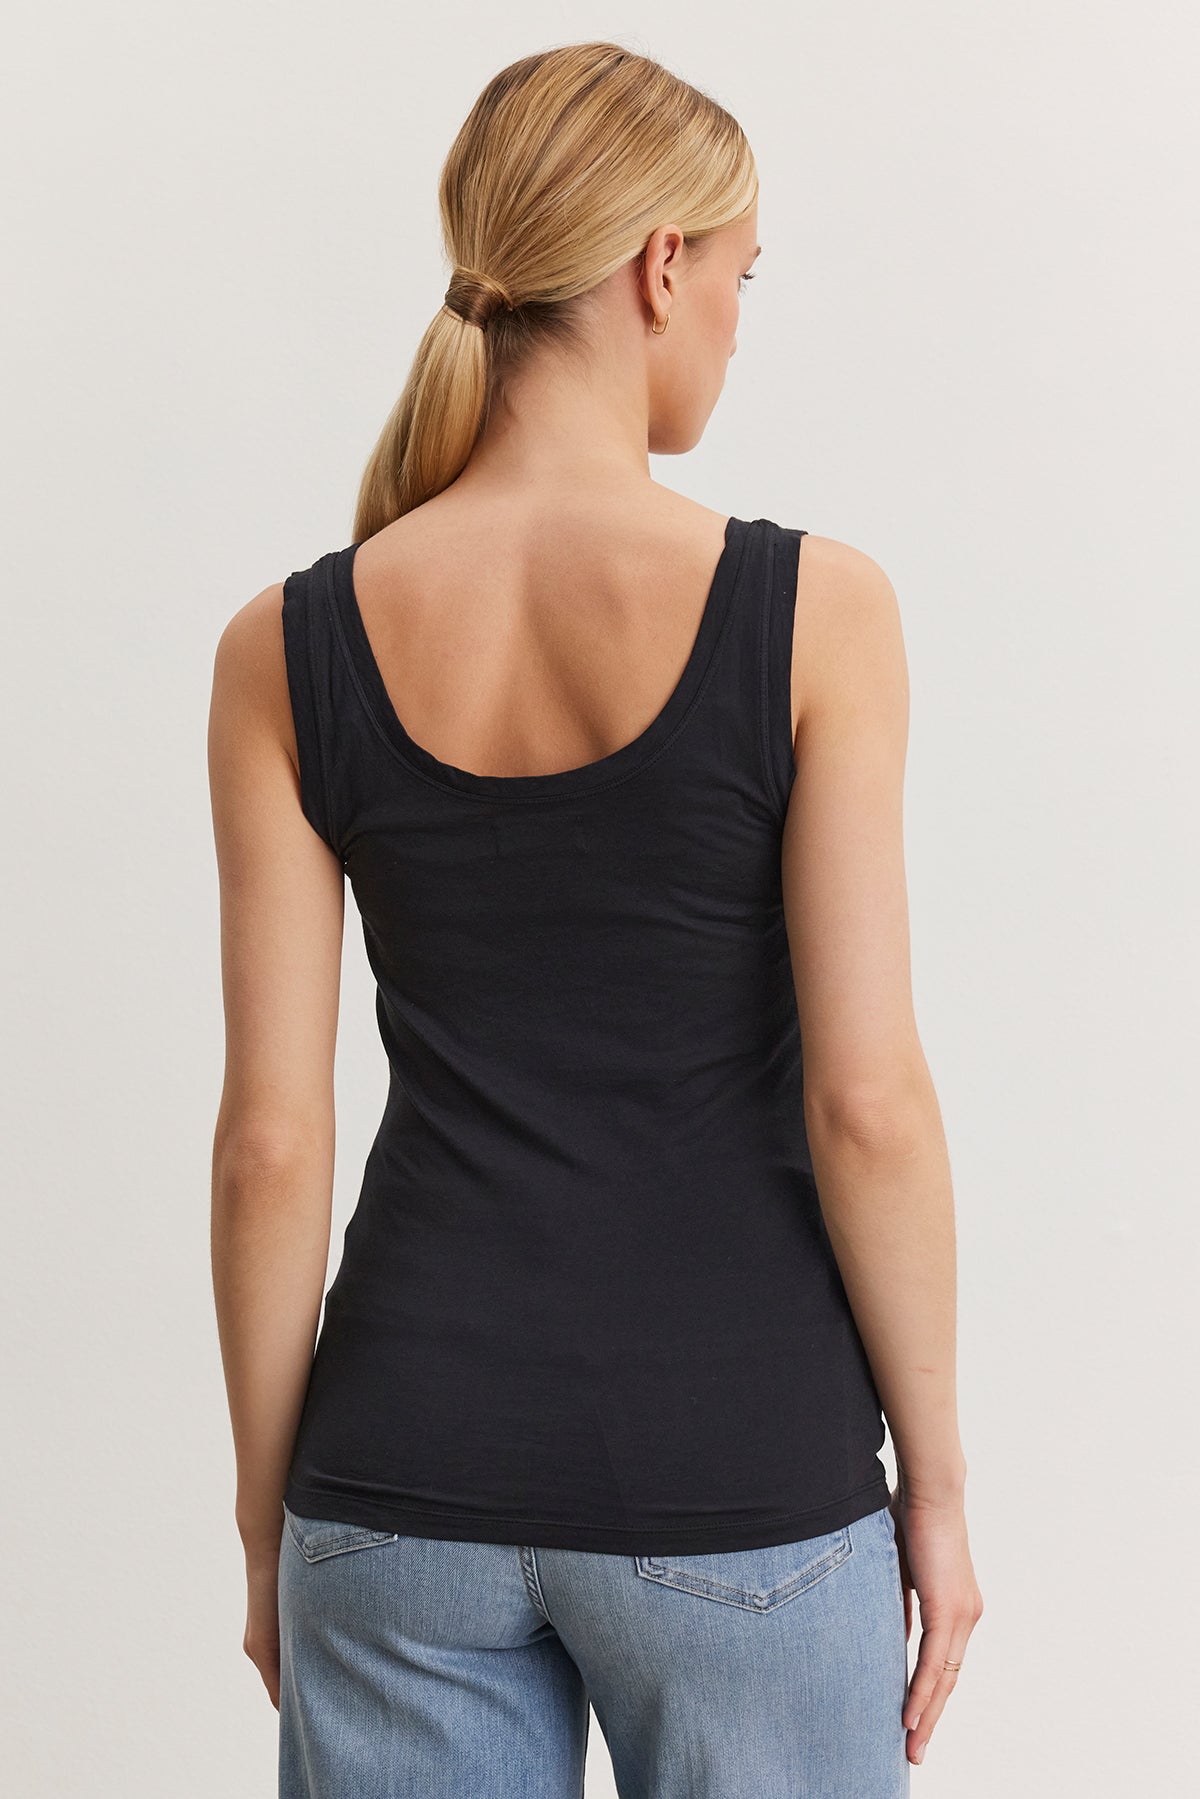 A woman with blonde hair in a low ponytail, wearing a fitted black MOSSY TANK TOP by Velvet by Graham & Spencer and light blue jeans, is viewed from the back against a plain white background.-36984053039297